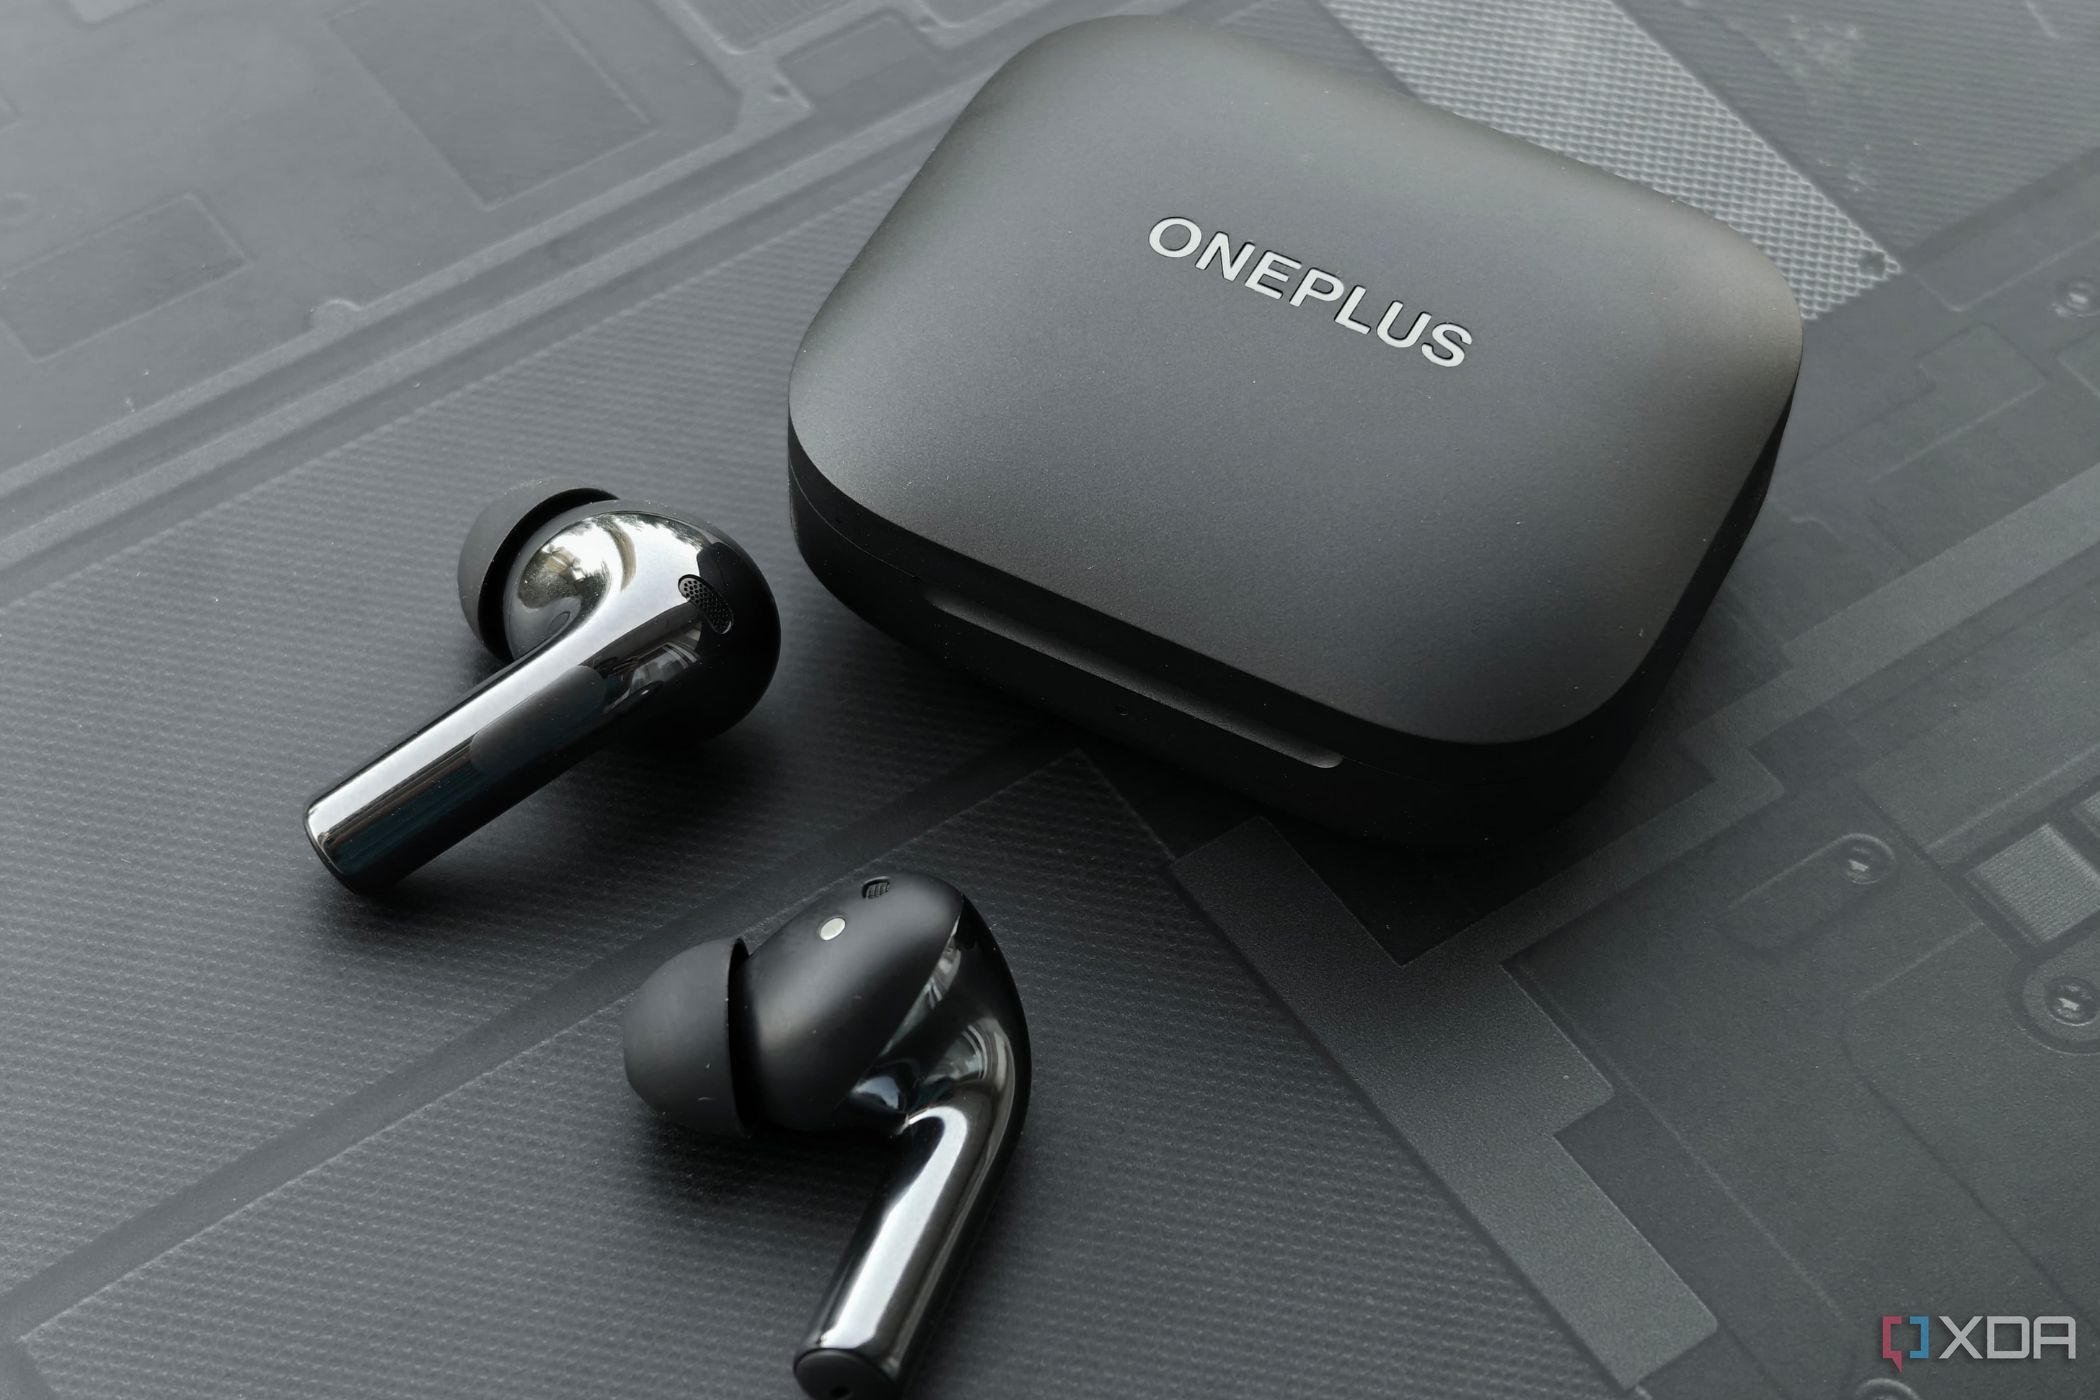 An image showing a pair of OnePlus Buds 3 earbuds sitting next to its charging case.